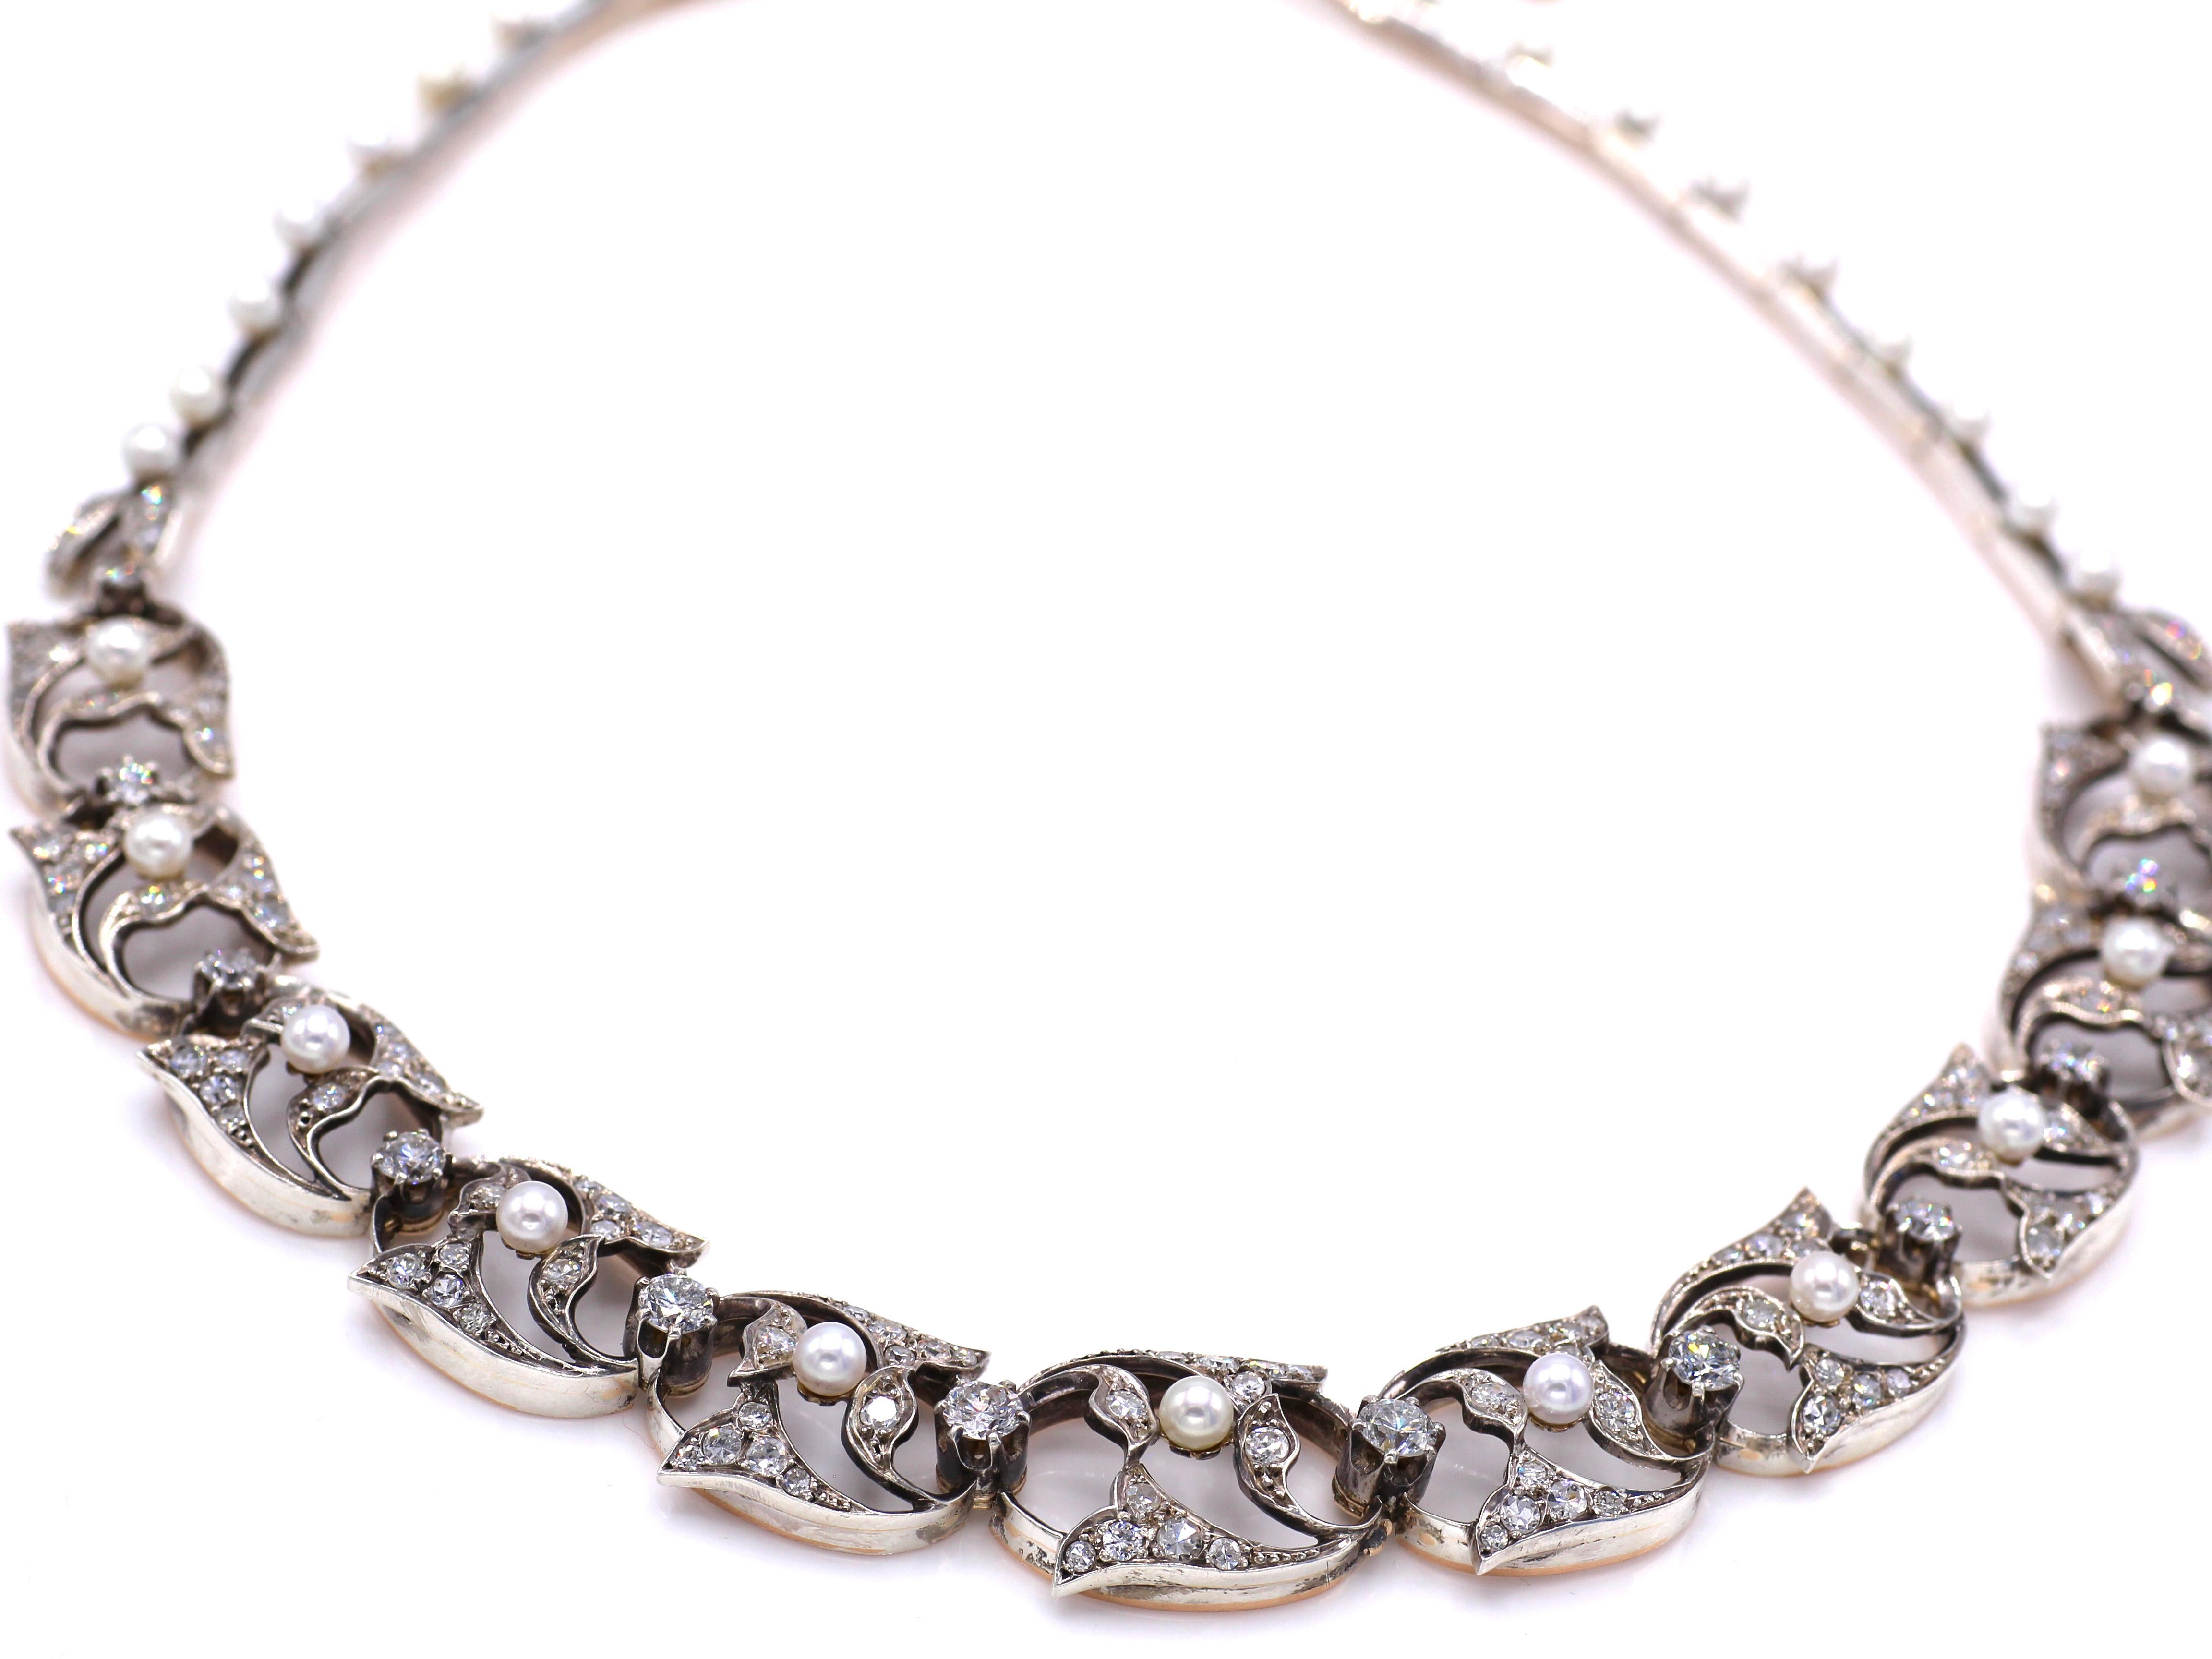 Beautifully designed and masterfully handcrafted in silver topped 18 karat gold, this French antique necklace from ca 1870 is a unique piece of period jewelry. Set with 21 perfectly matched white and lustrous pearls and embellished with bright white